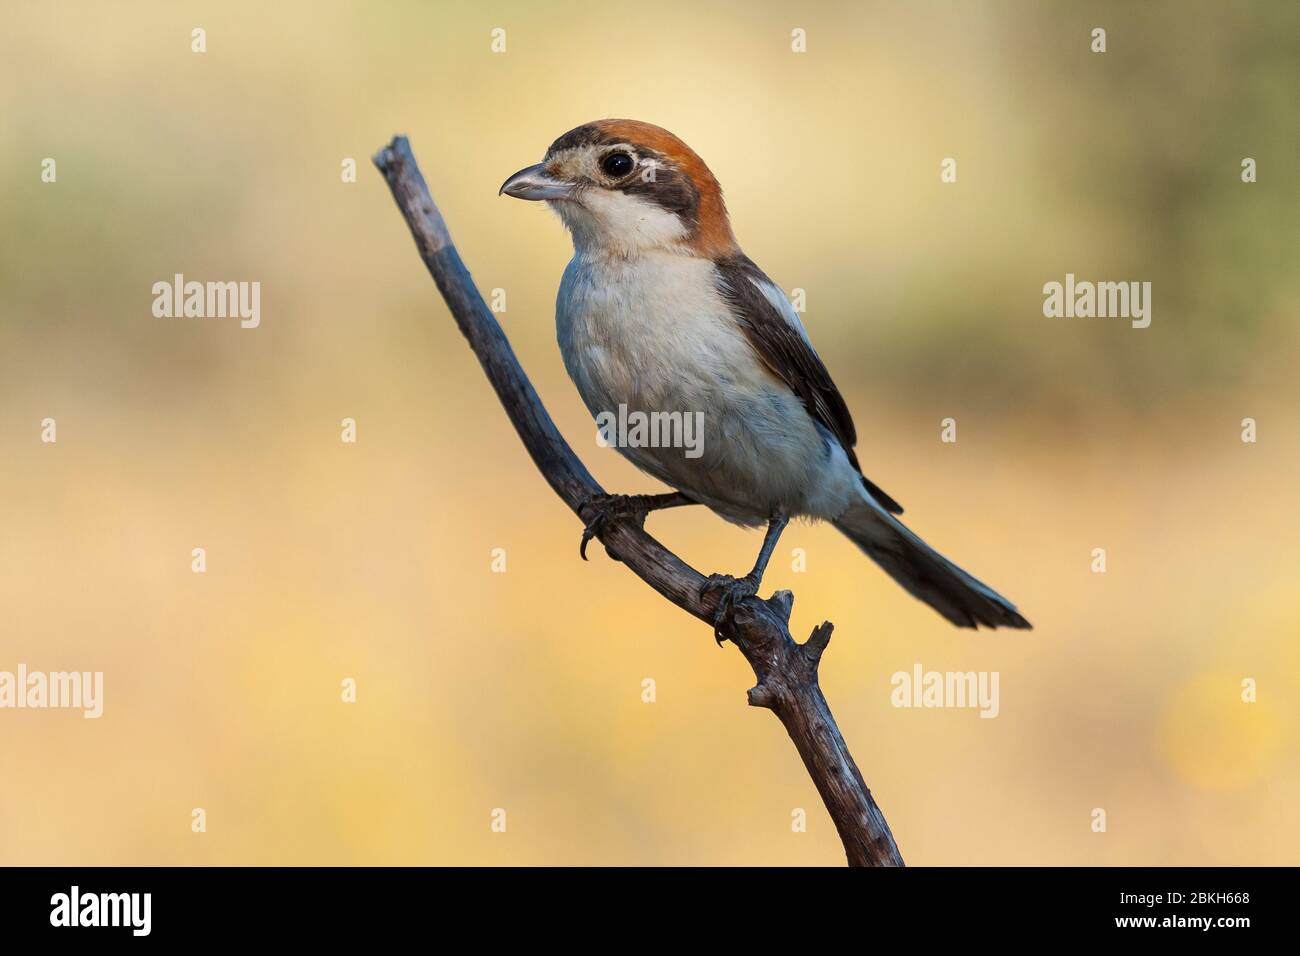 Woodchat Shrike, Senator Lanius, perched on a tree branch on a clear unfocused background . Spain Stock Photo